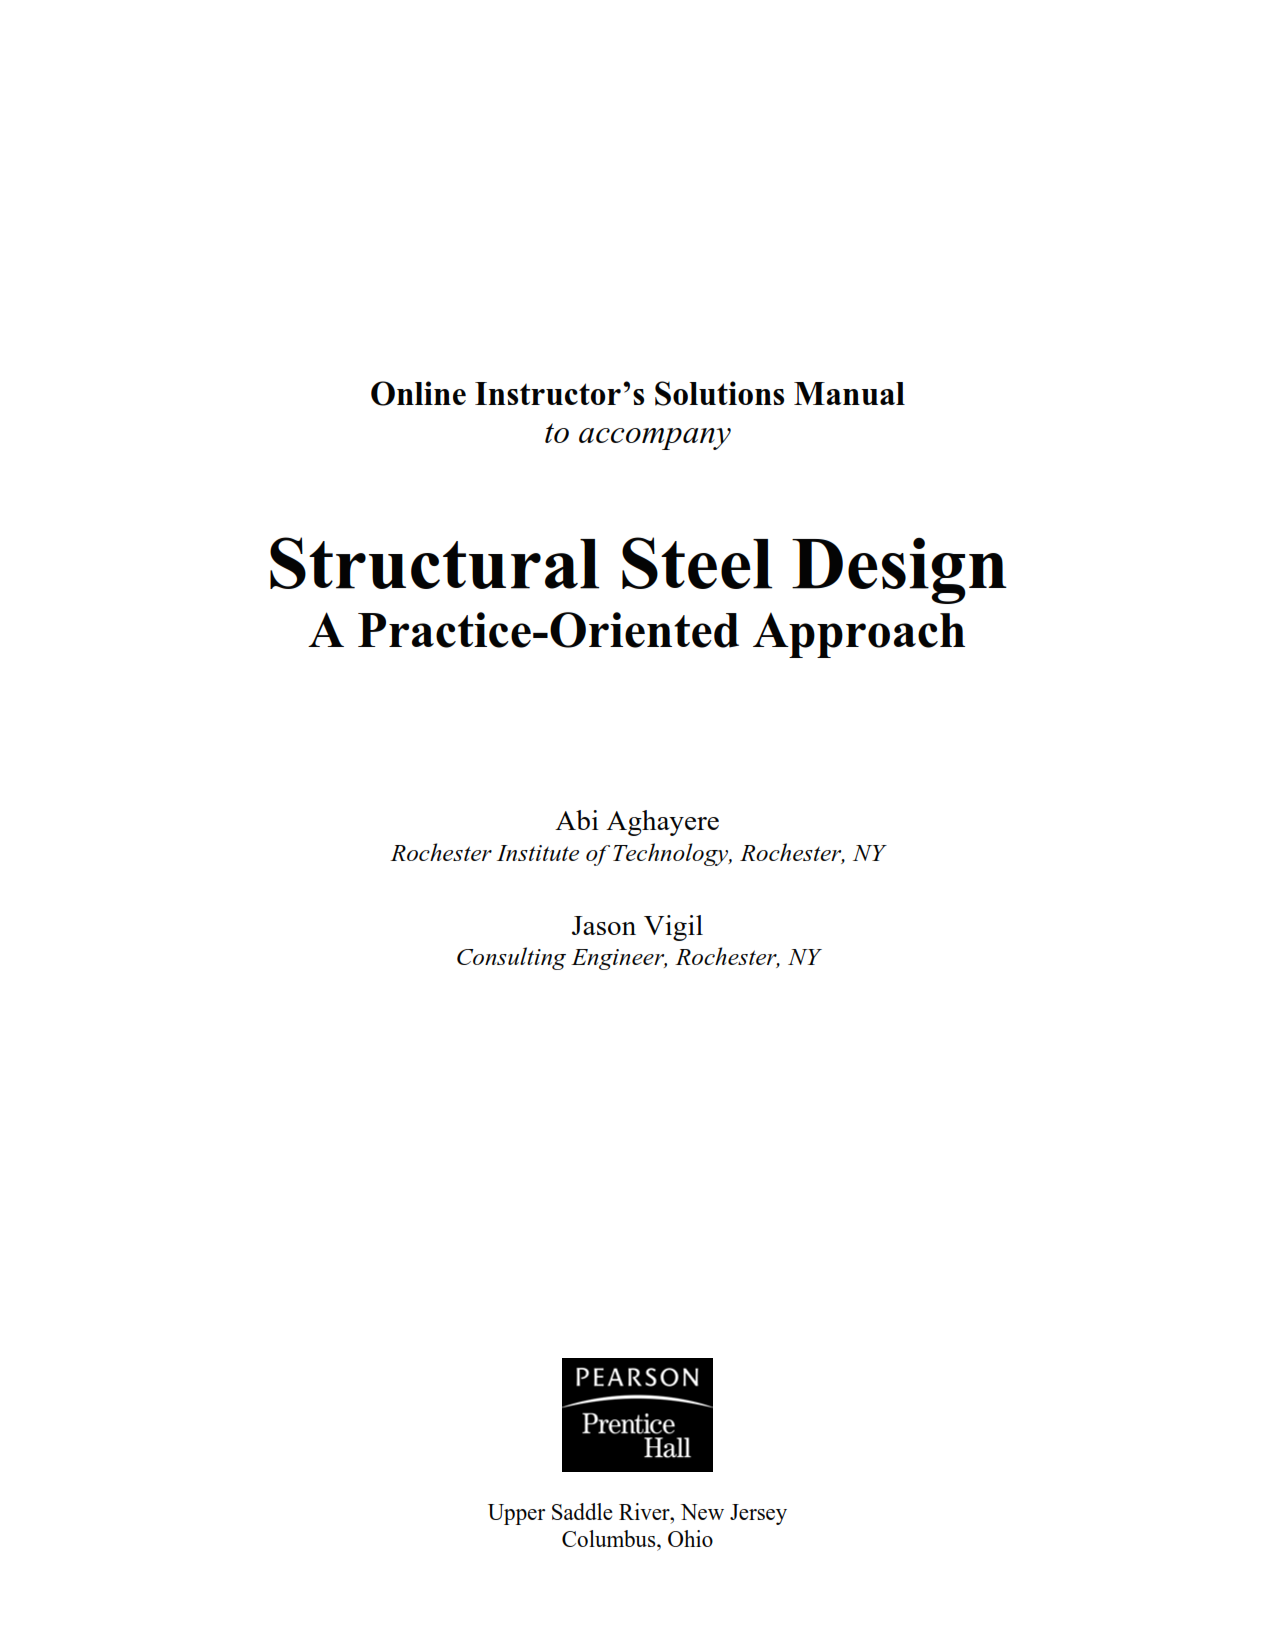 download free Structural steel design a practice oriented approach 2nd edition solution manual and answers eBook pdf Aghayere, Abi O.; Vigil, Jason